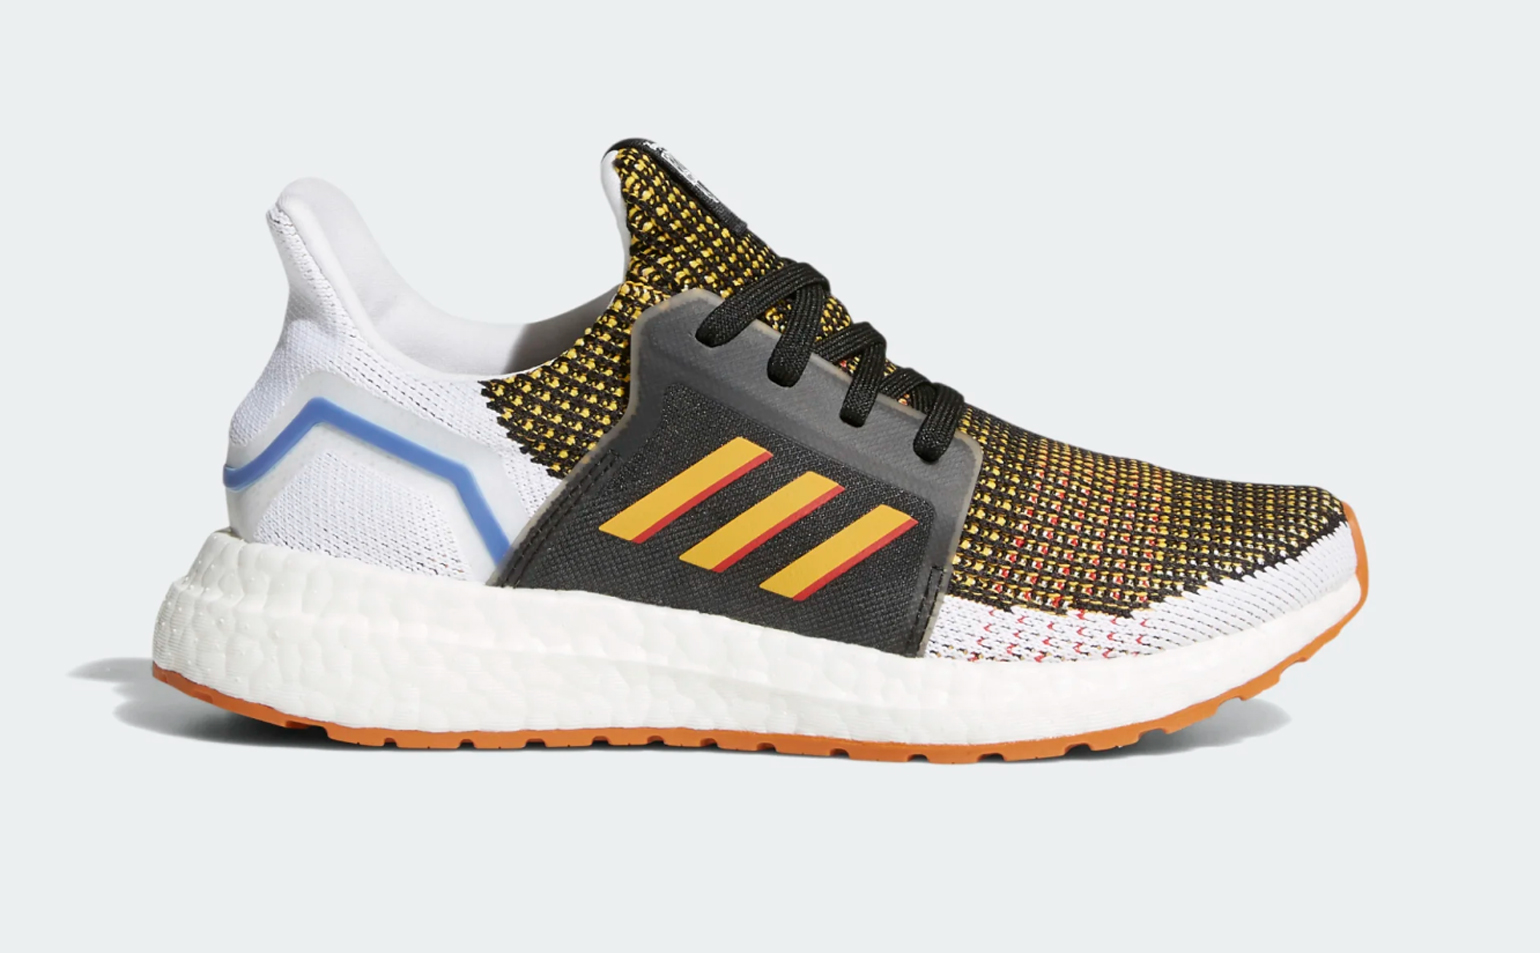 adidas toy story 4 collection